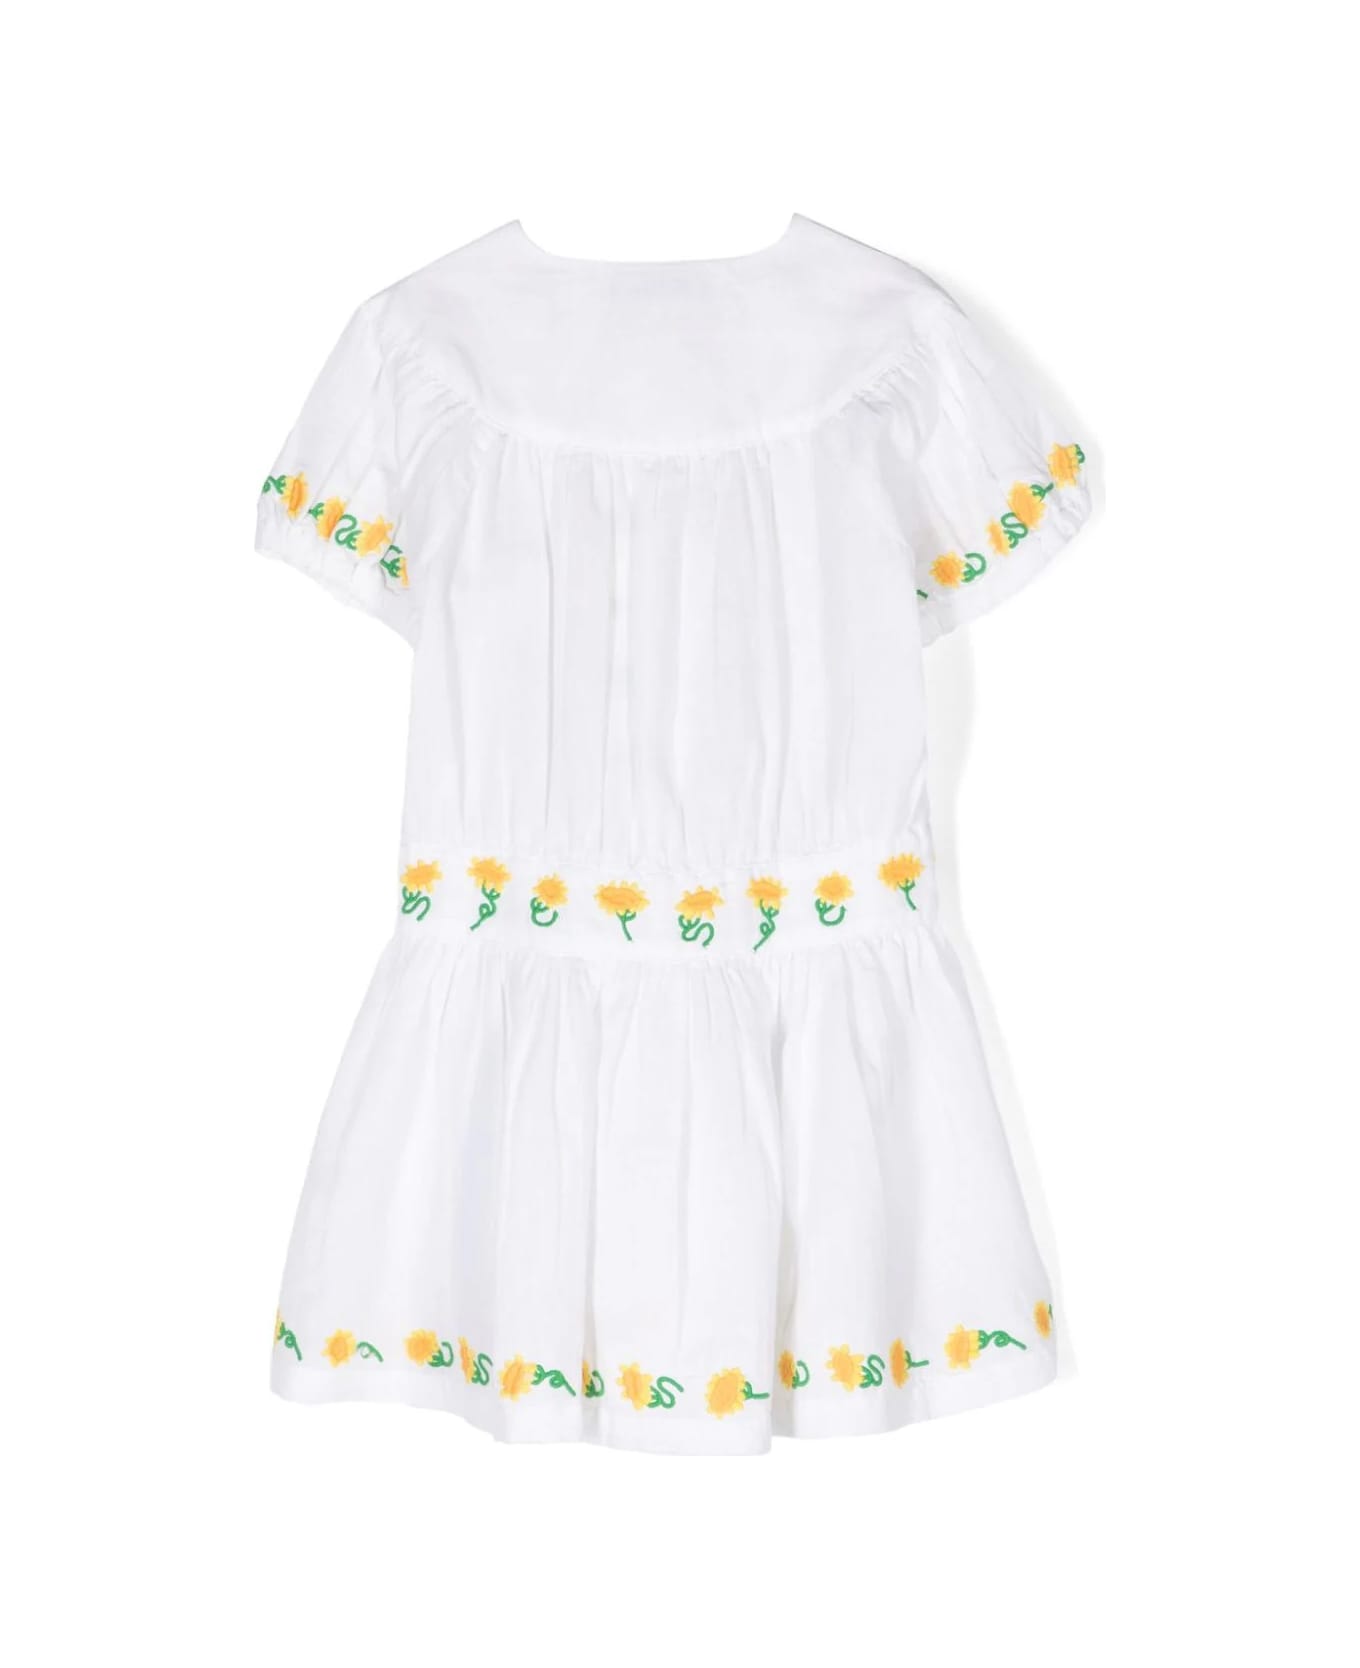 Stella McCartney Kids White Dress With Embroidered Sunflowers - White ワンピース＆ドレス